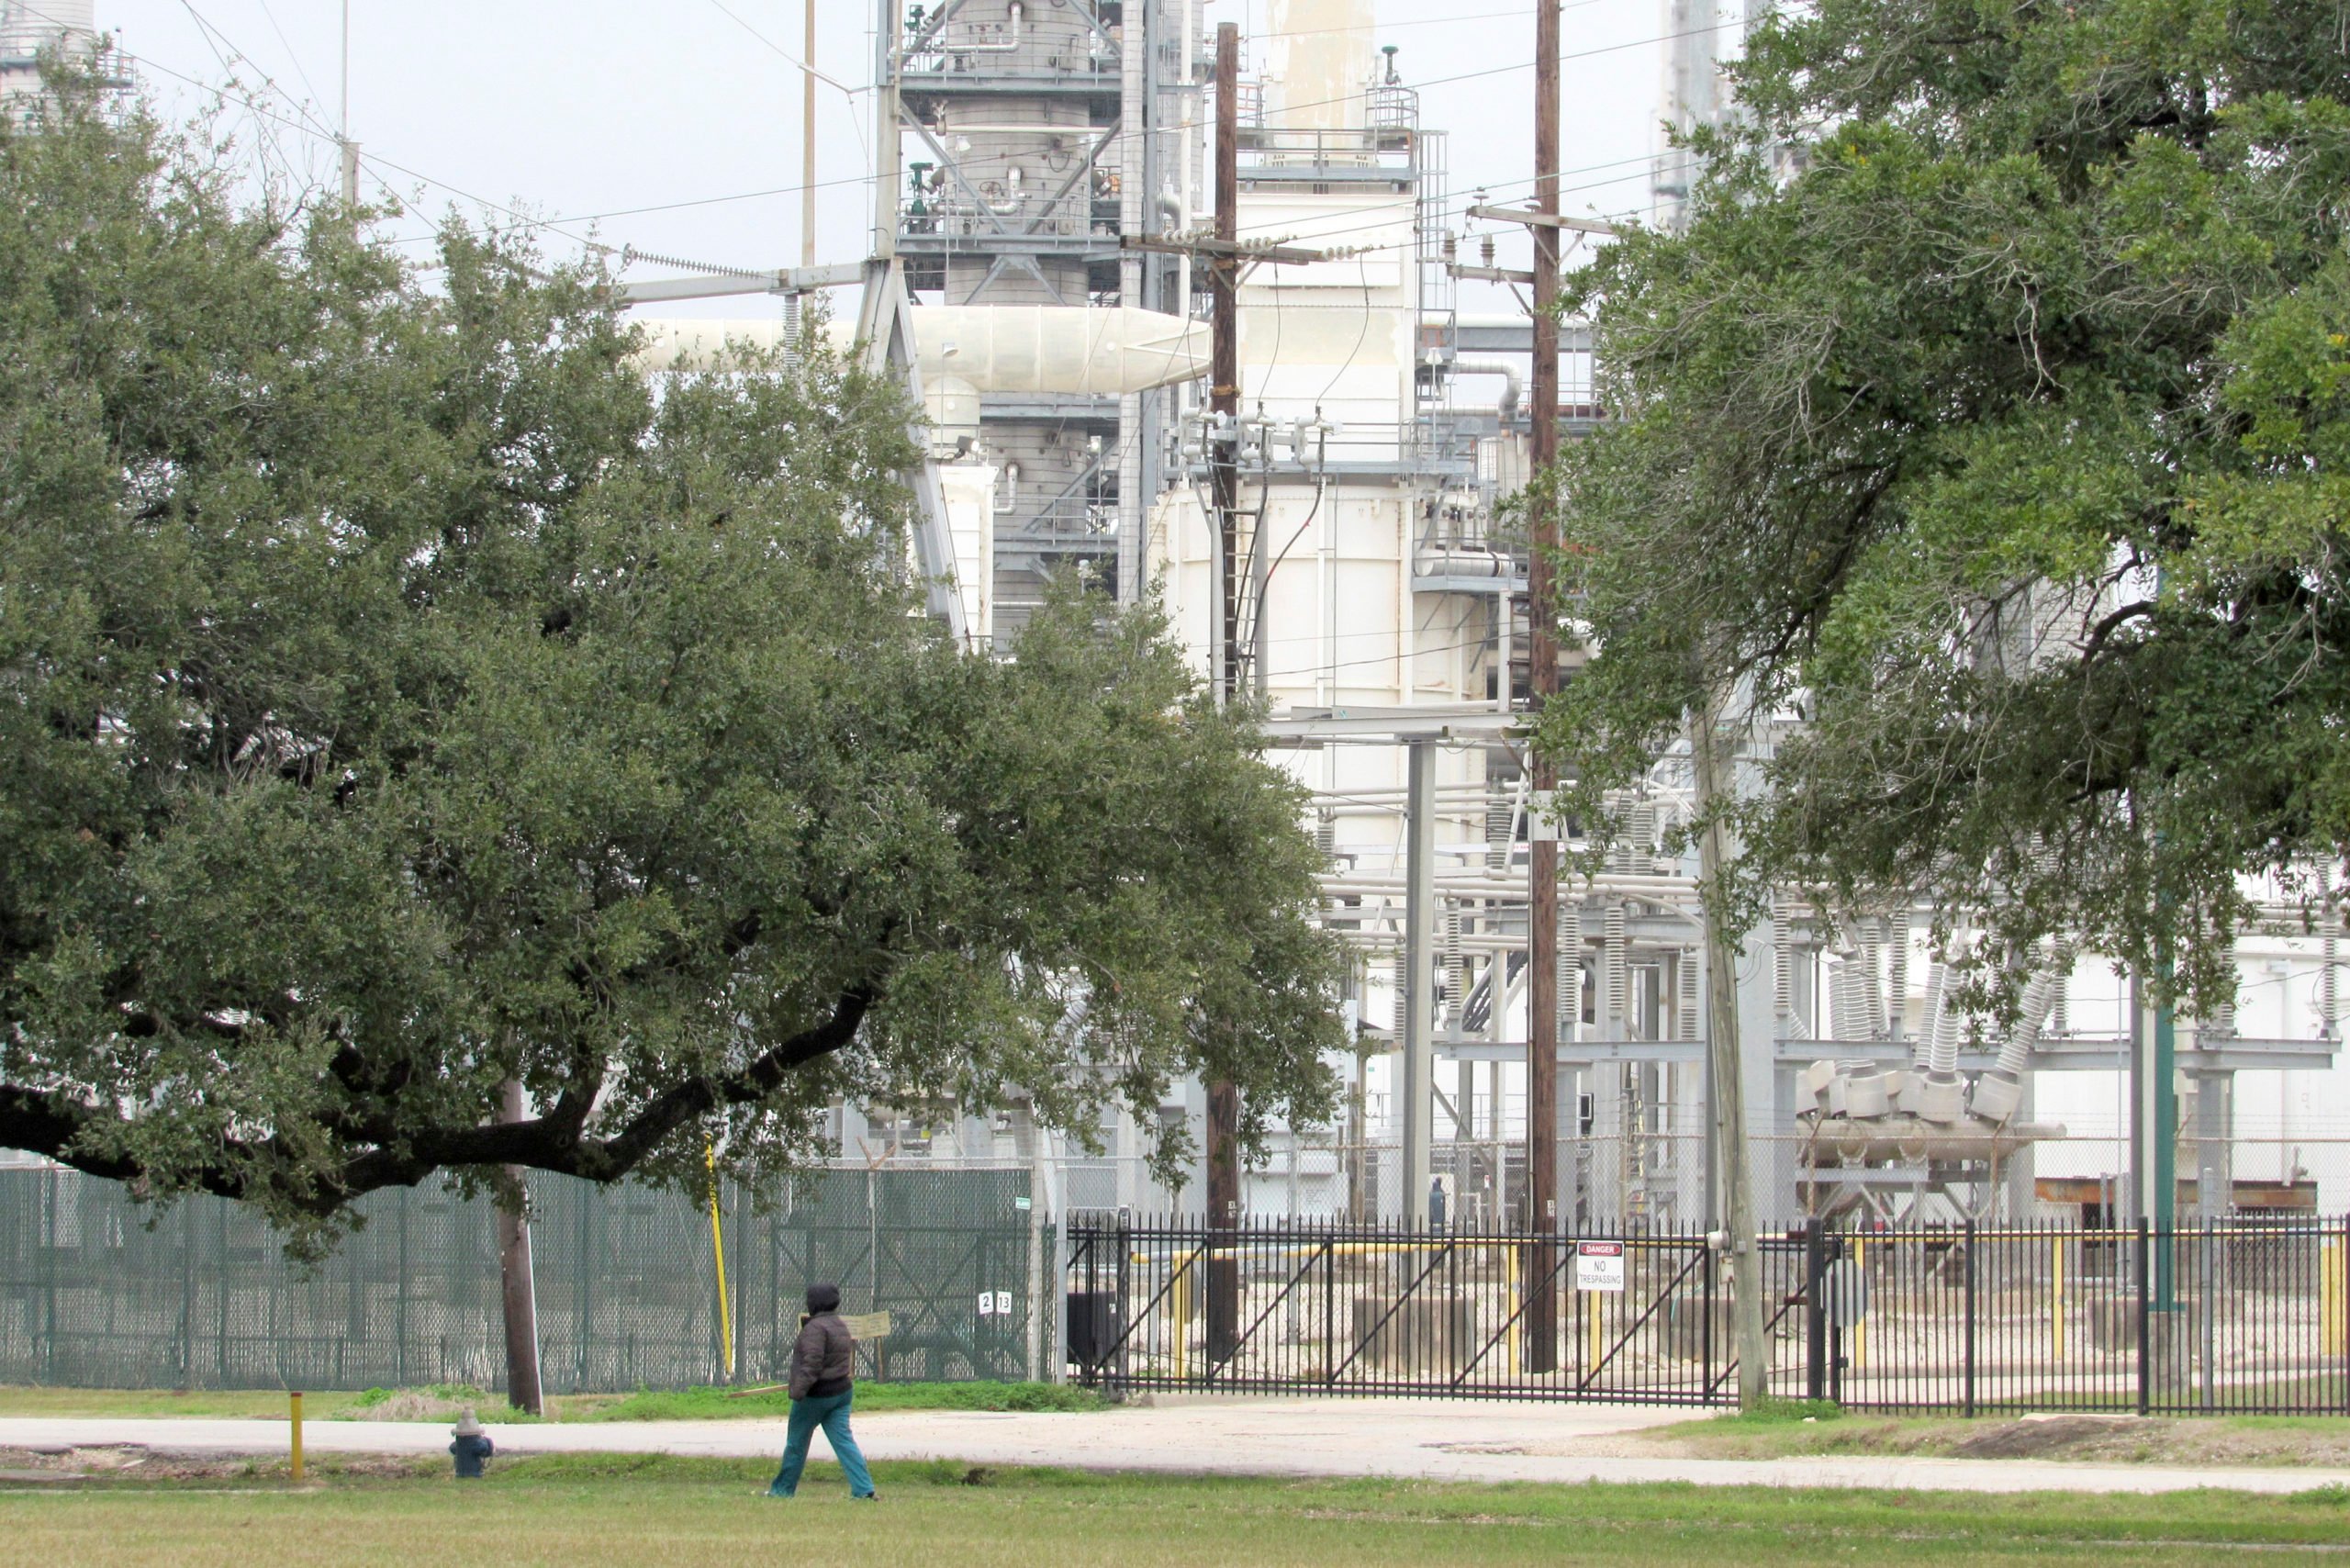 Houston resident Guadalupe Ortiz takes her daily walk at a city park located across the street from her home and a Valero oil refinery.